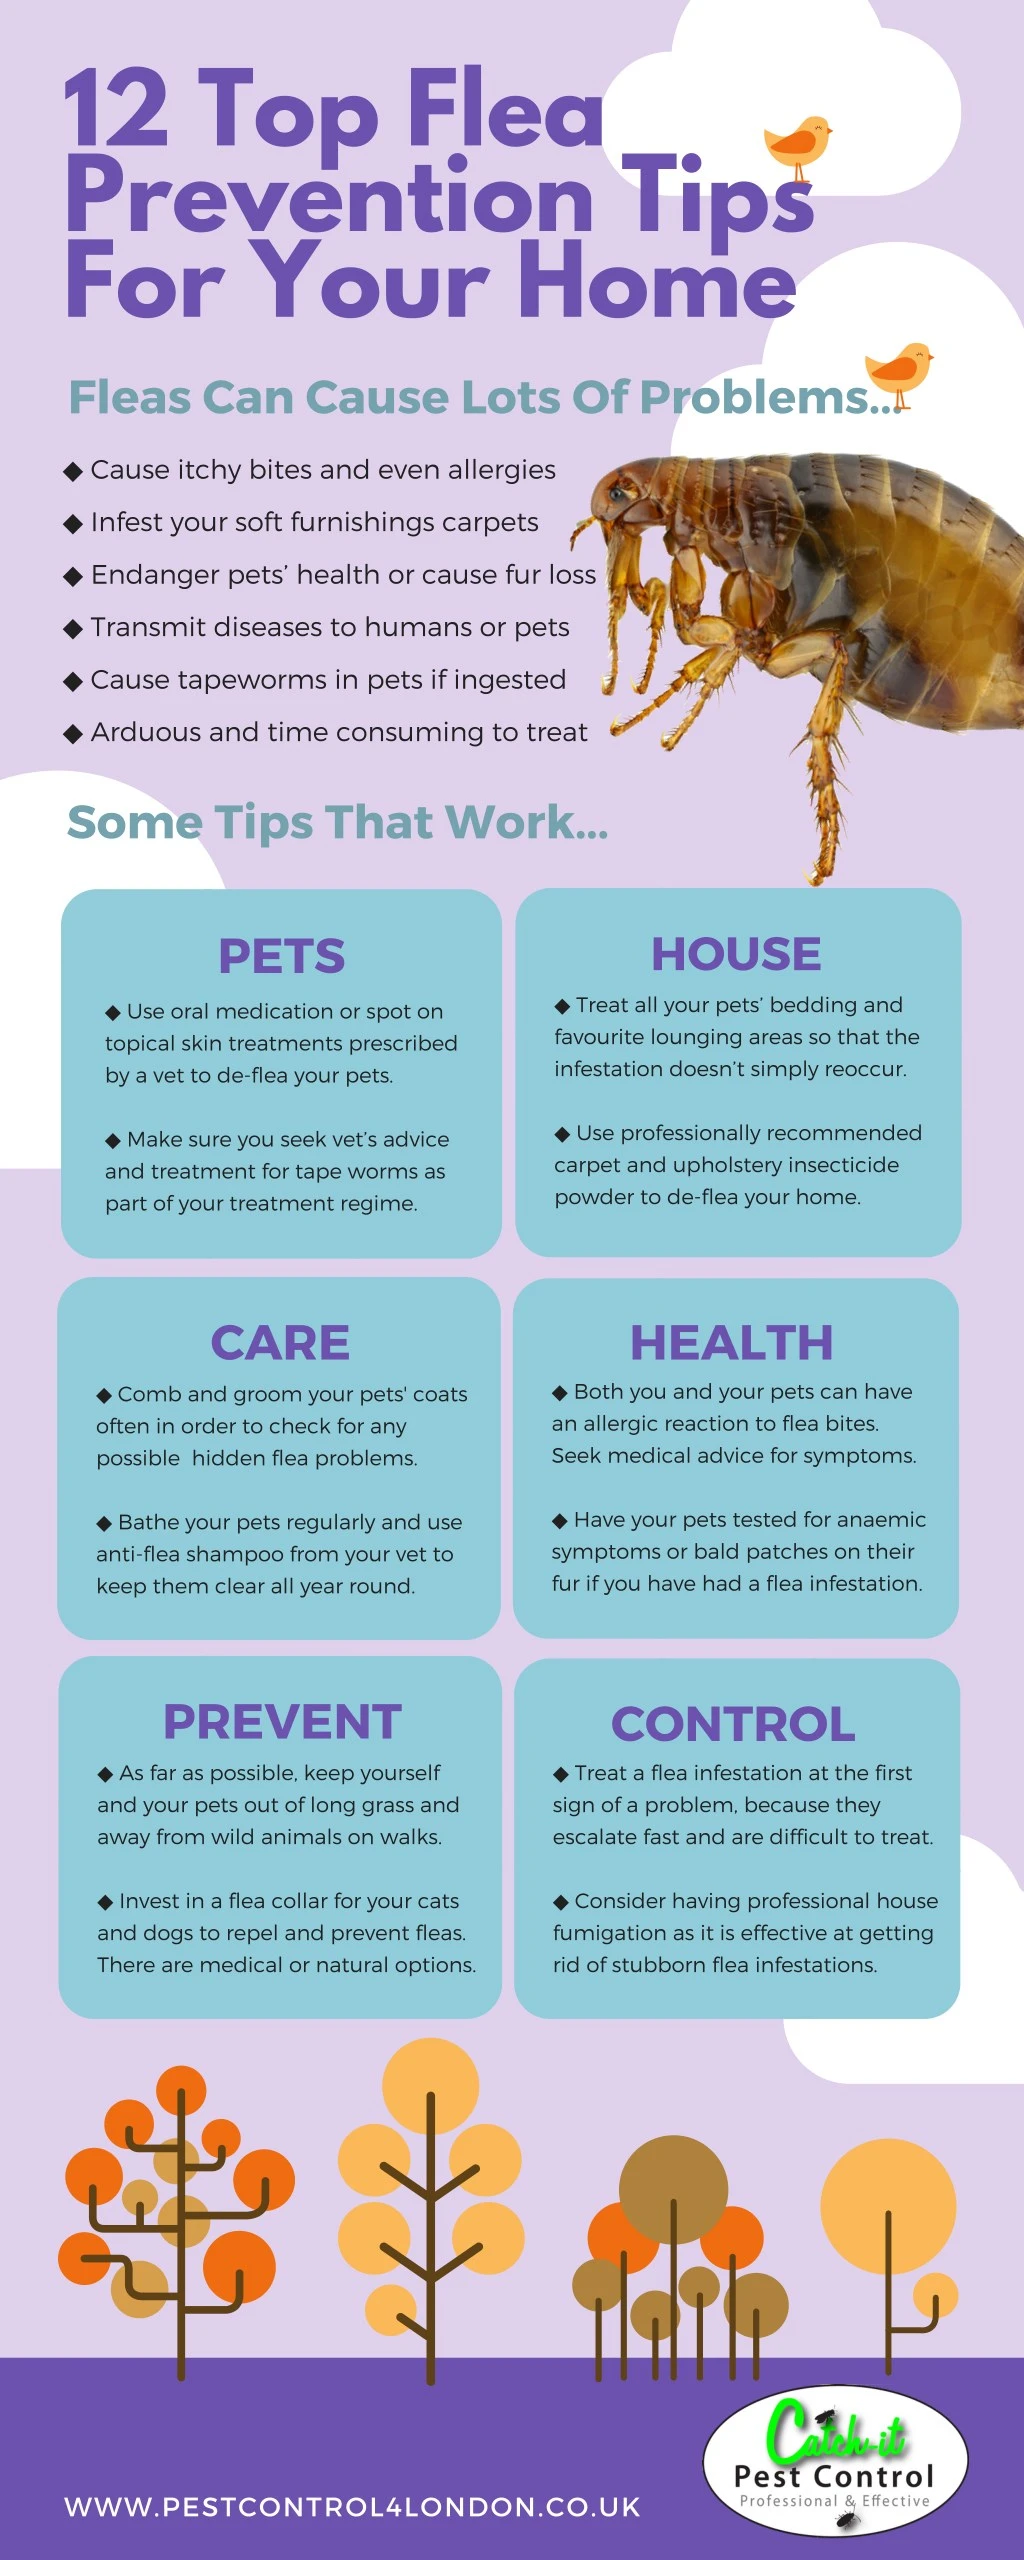 12 top flea prevention tips for your home